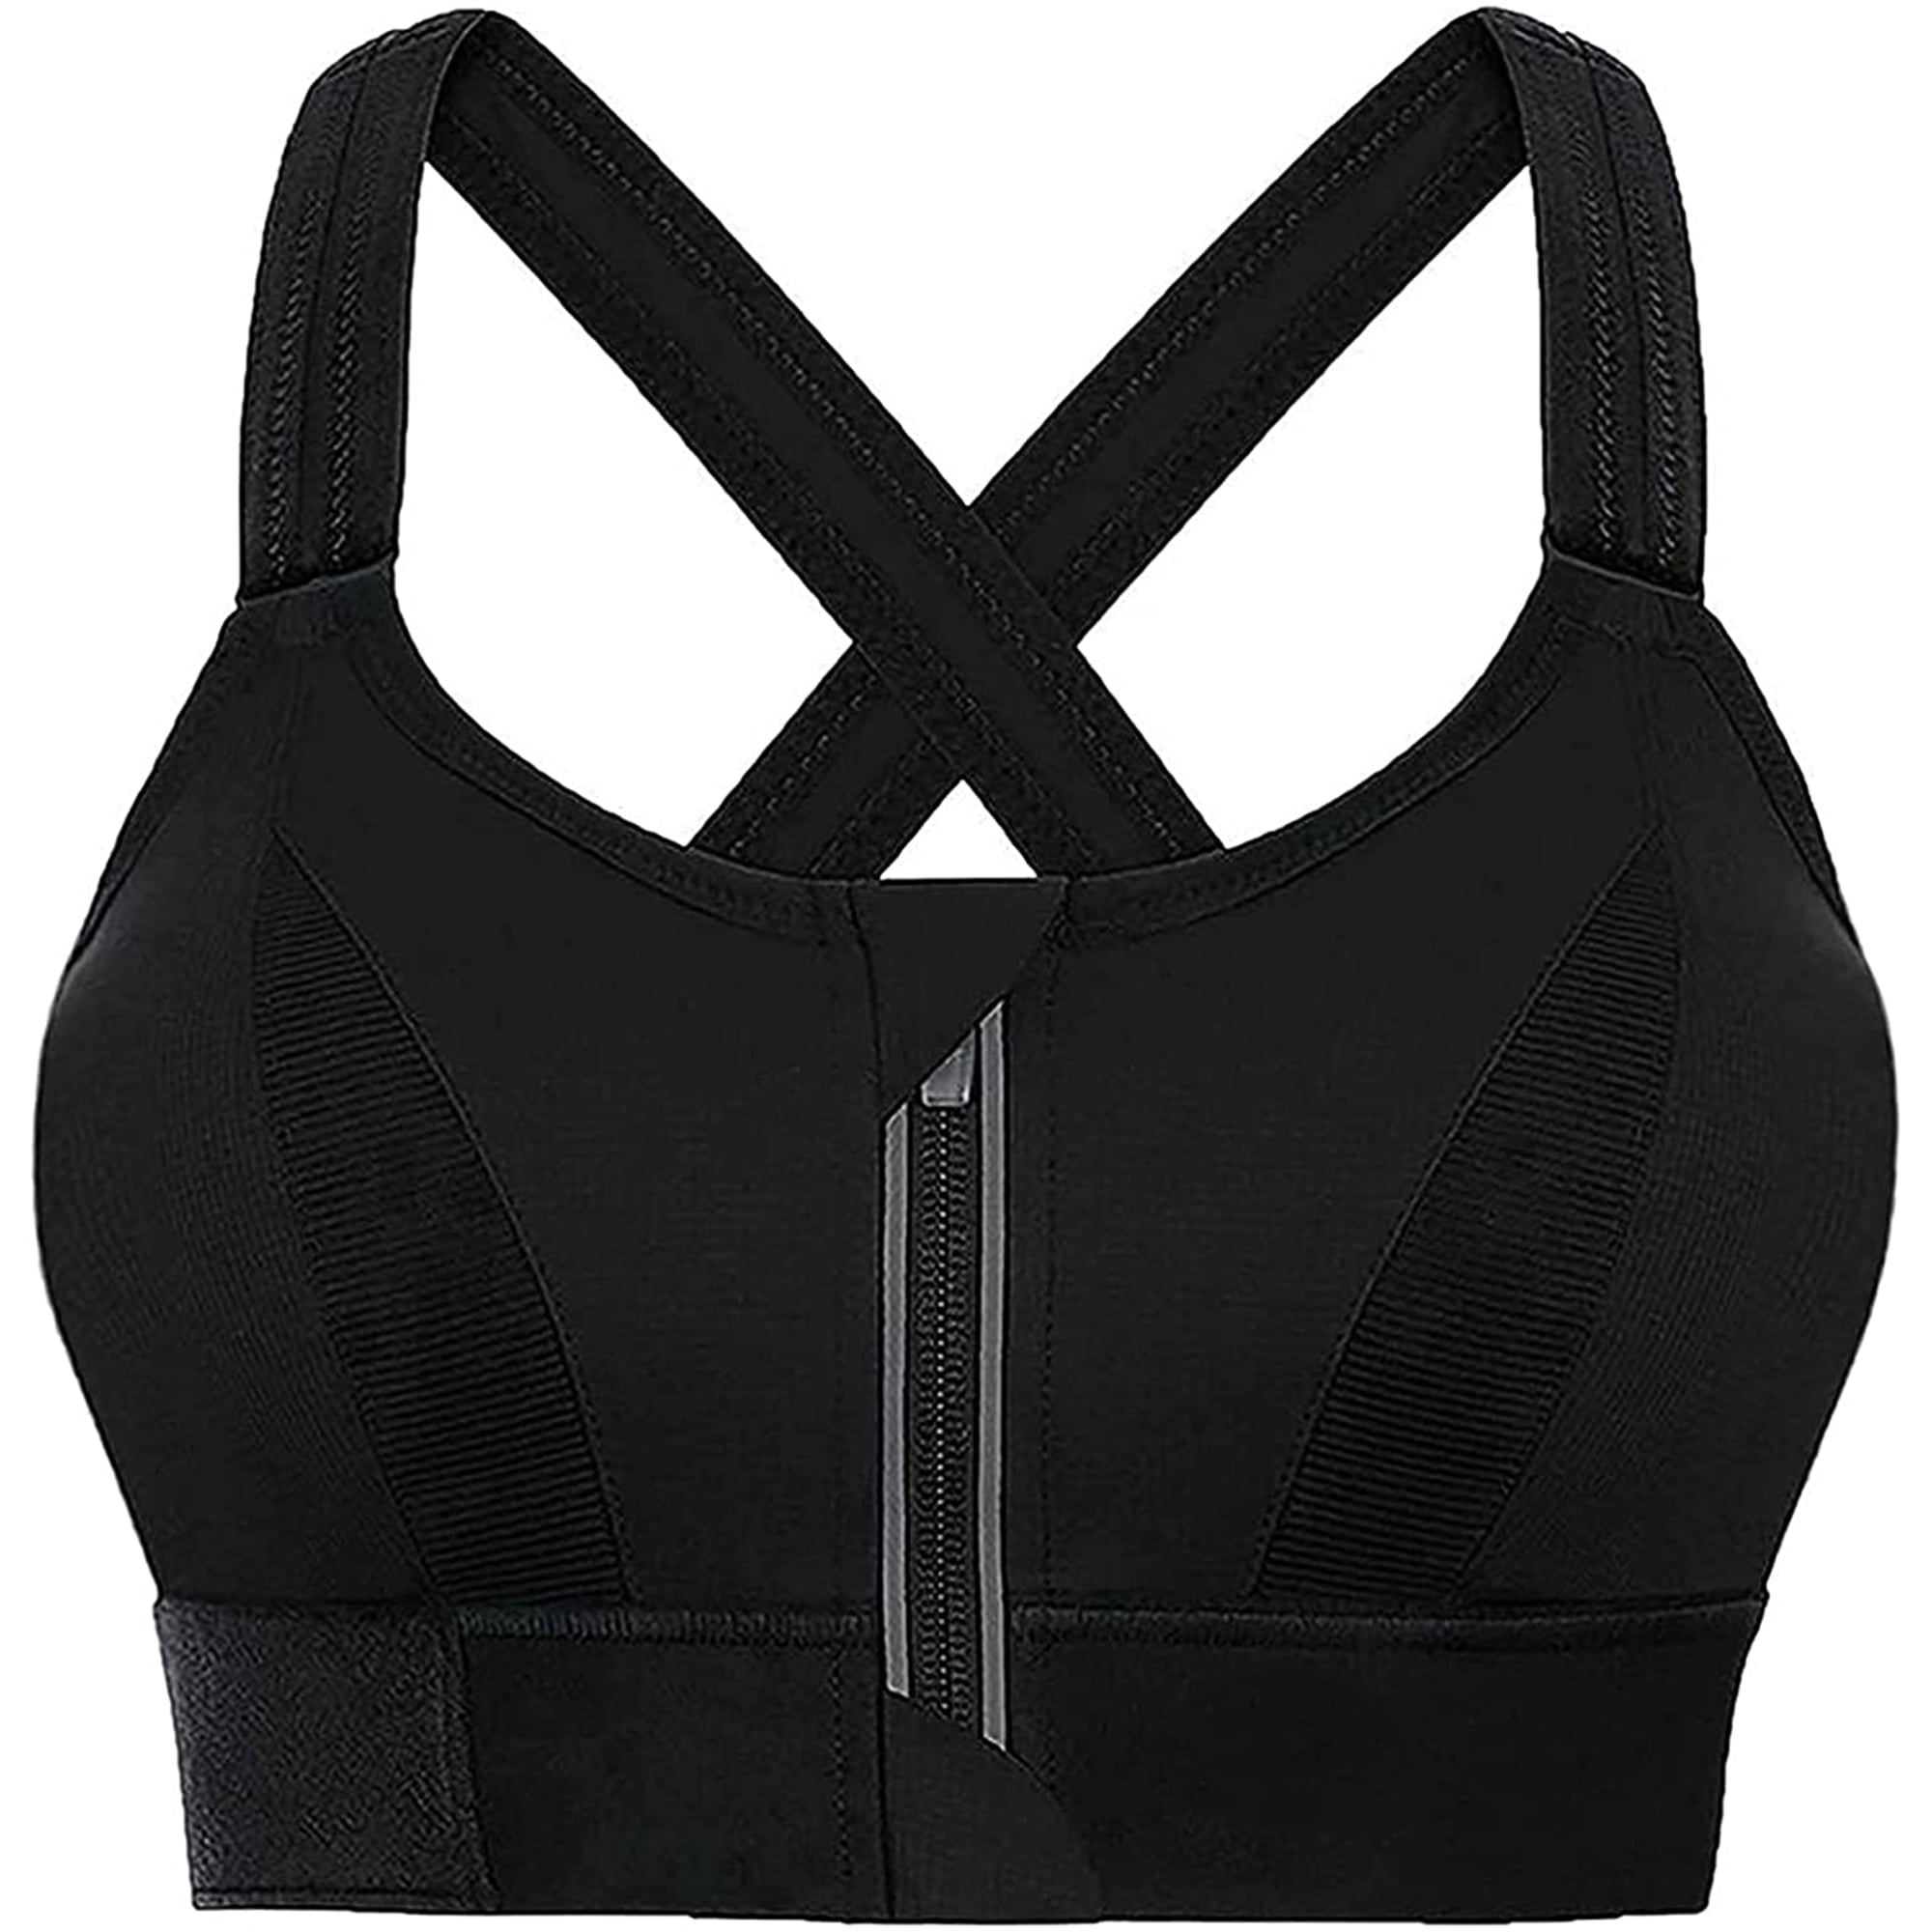 Buy RUNNING GIRL Zip Front Sports Bra for Women,High Impact Adjustable  Strap Criss-Cross Back Padded Workout Yoga Bra, Grey, X-Large at